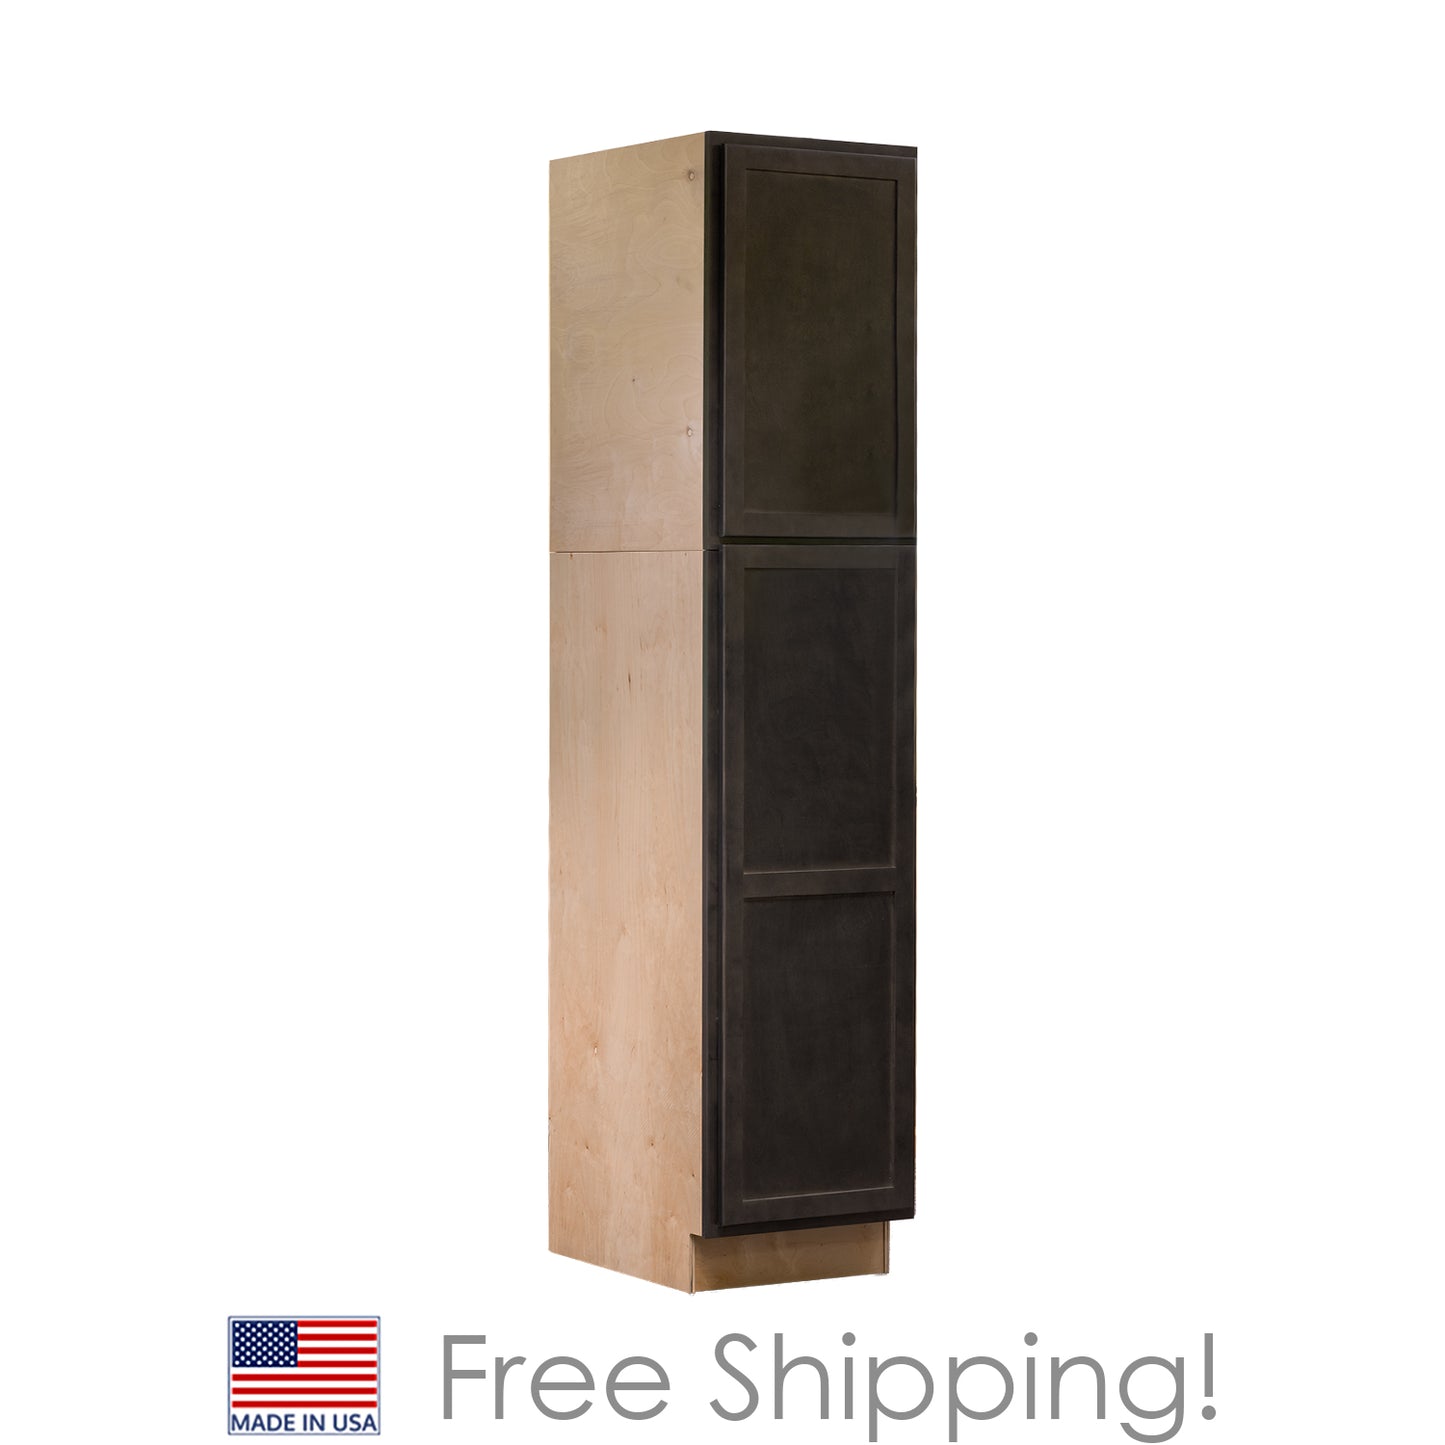 Quicklock RTA (Ready-to-Assemble) Espresso Stain Pantry Cabinet- 18" W